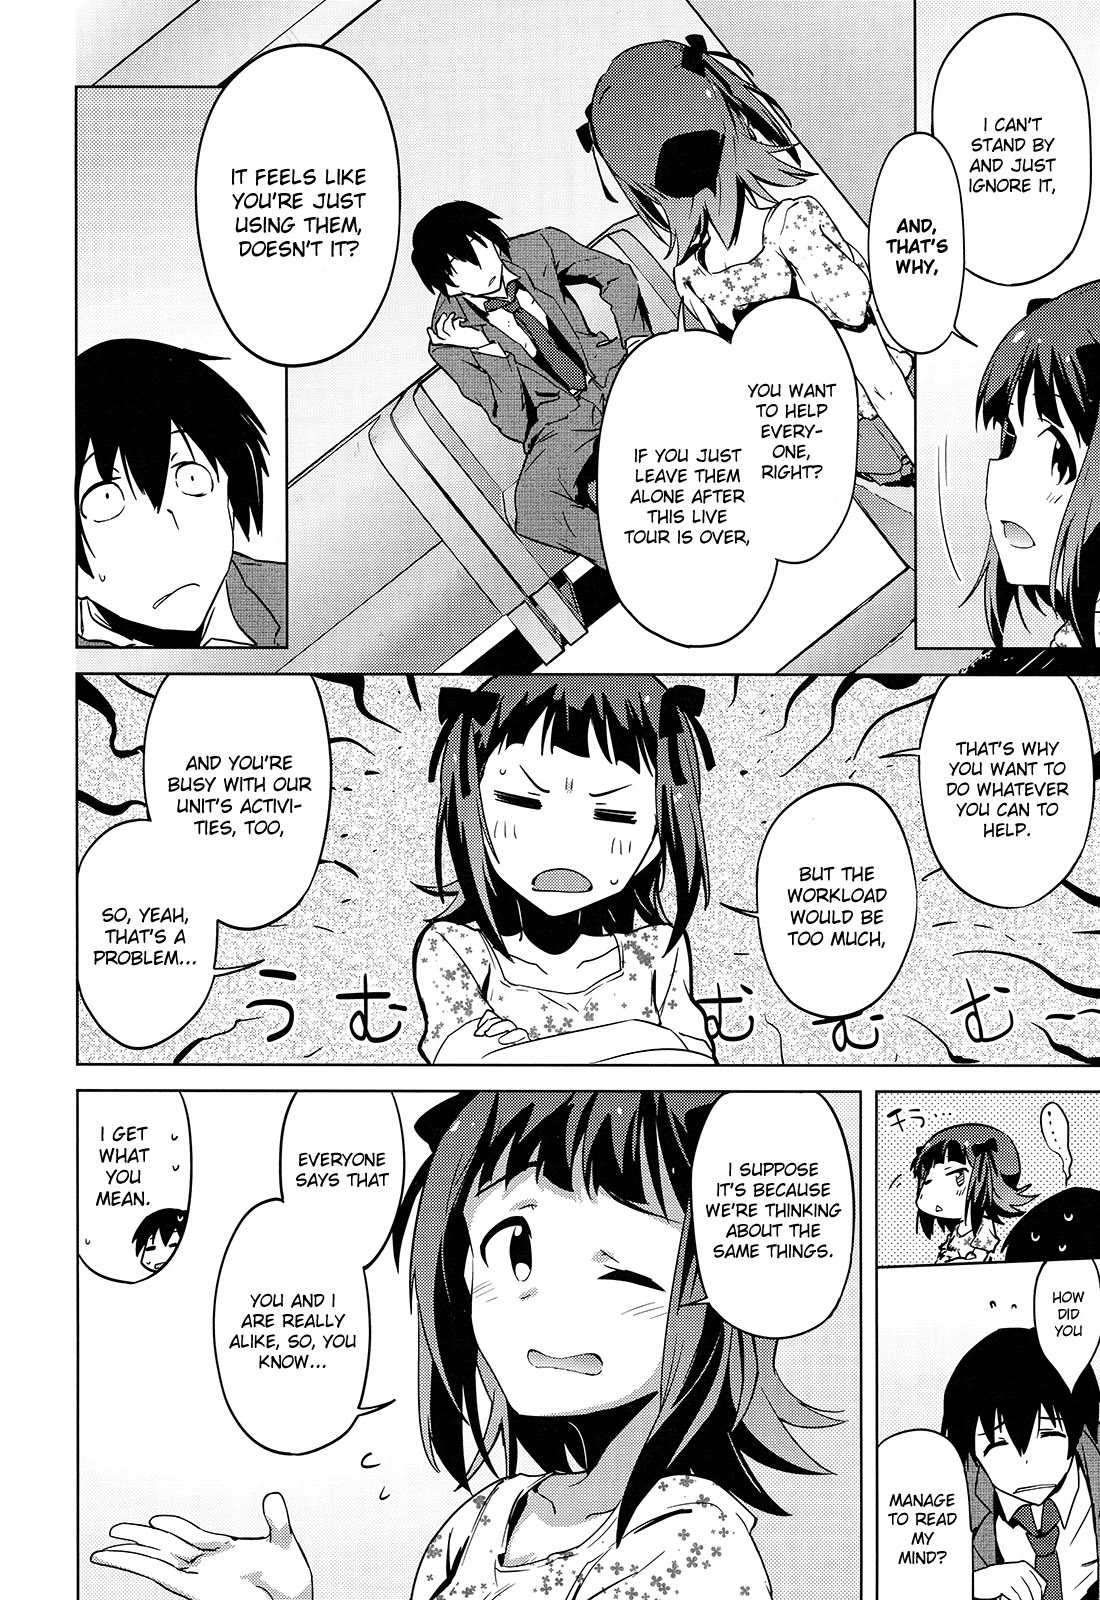 THE iDOLM@STER 2 The world is all one!! Vol. 3 Ch. 18 More and More